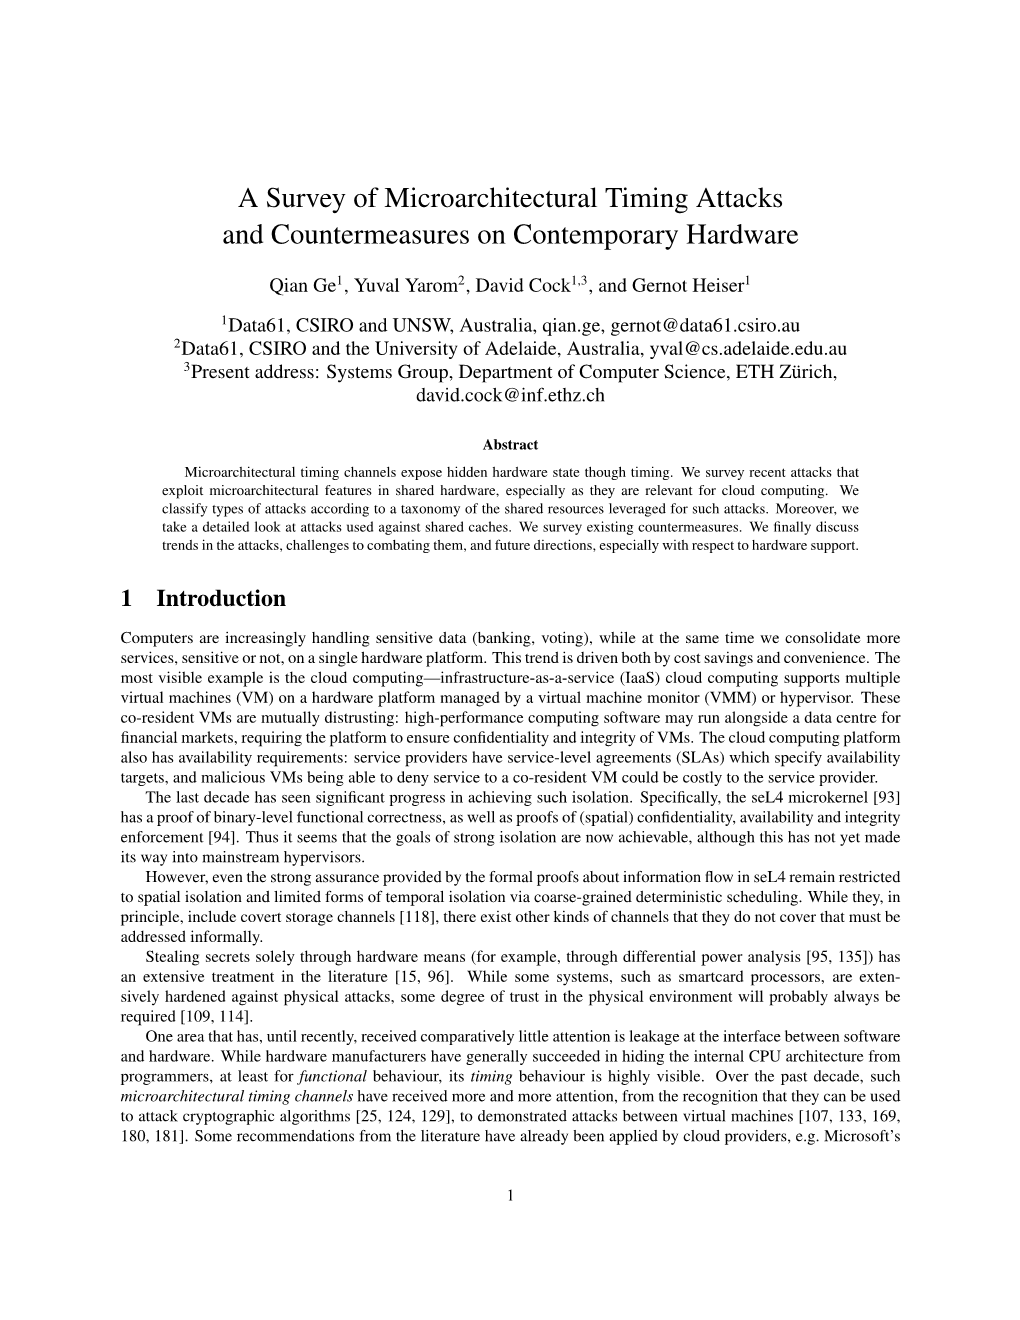 A Survey of Microarchitectural Timing Attacks and Countermeasures on Contemporary Hardware